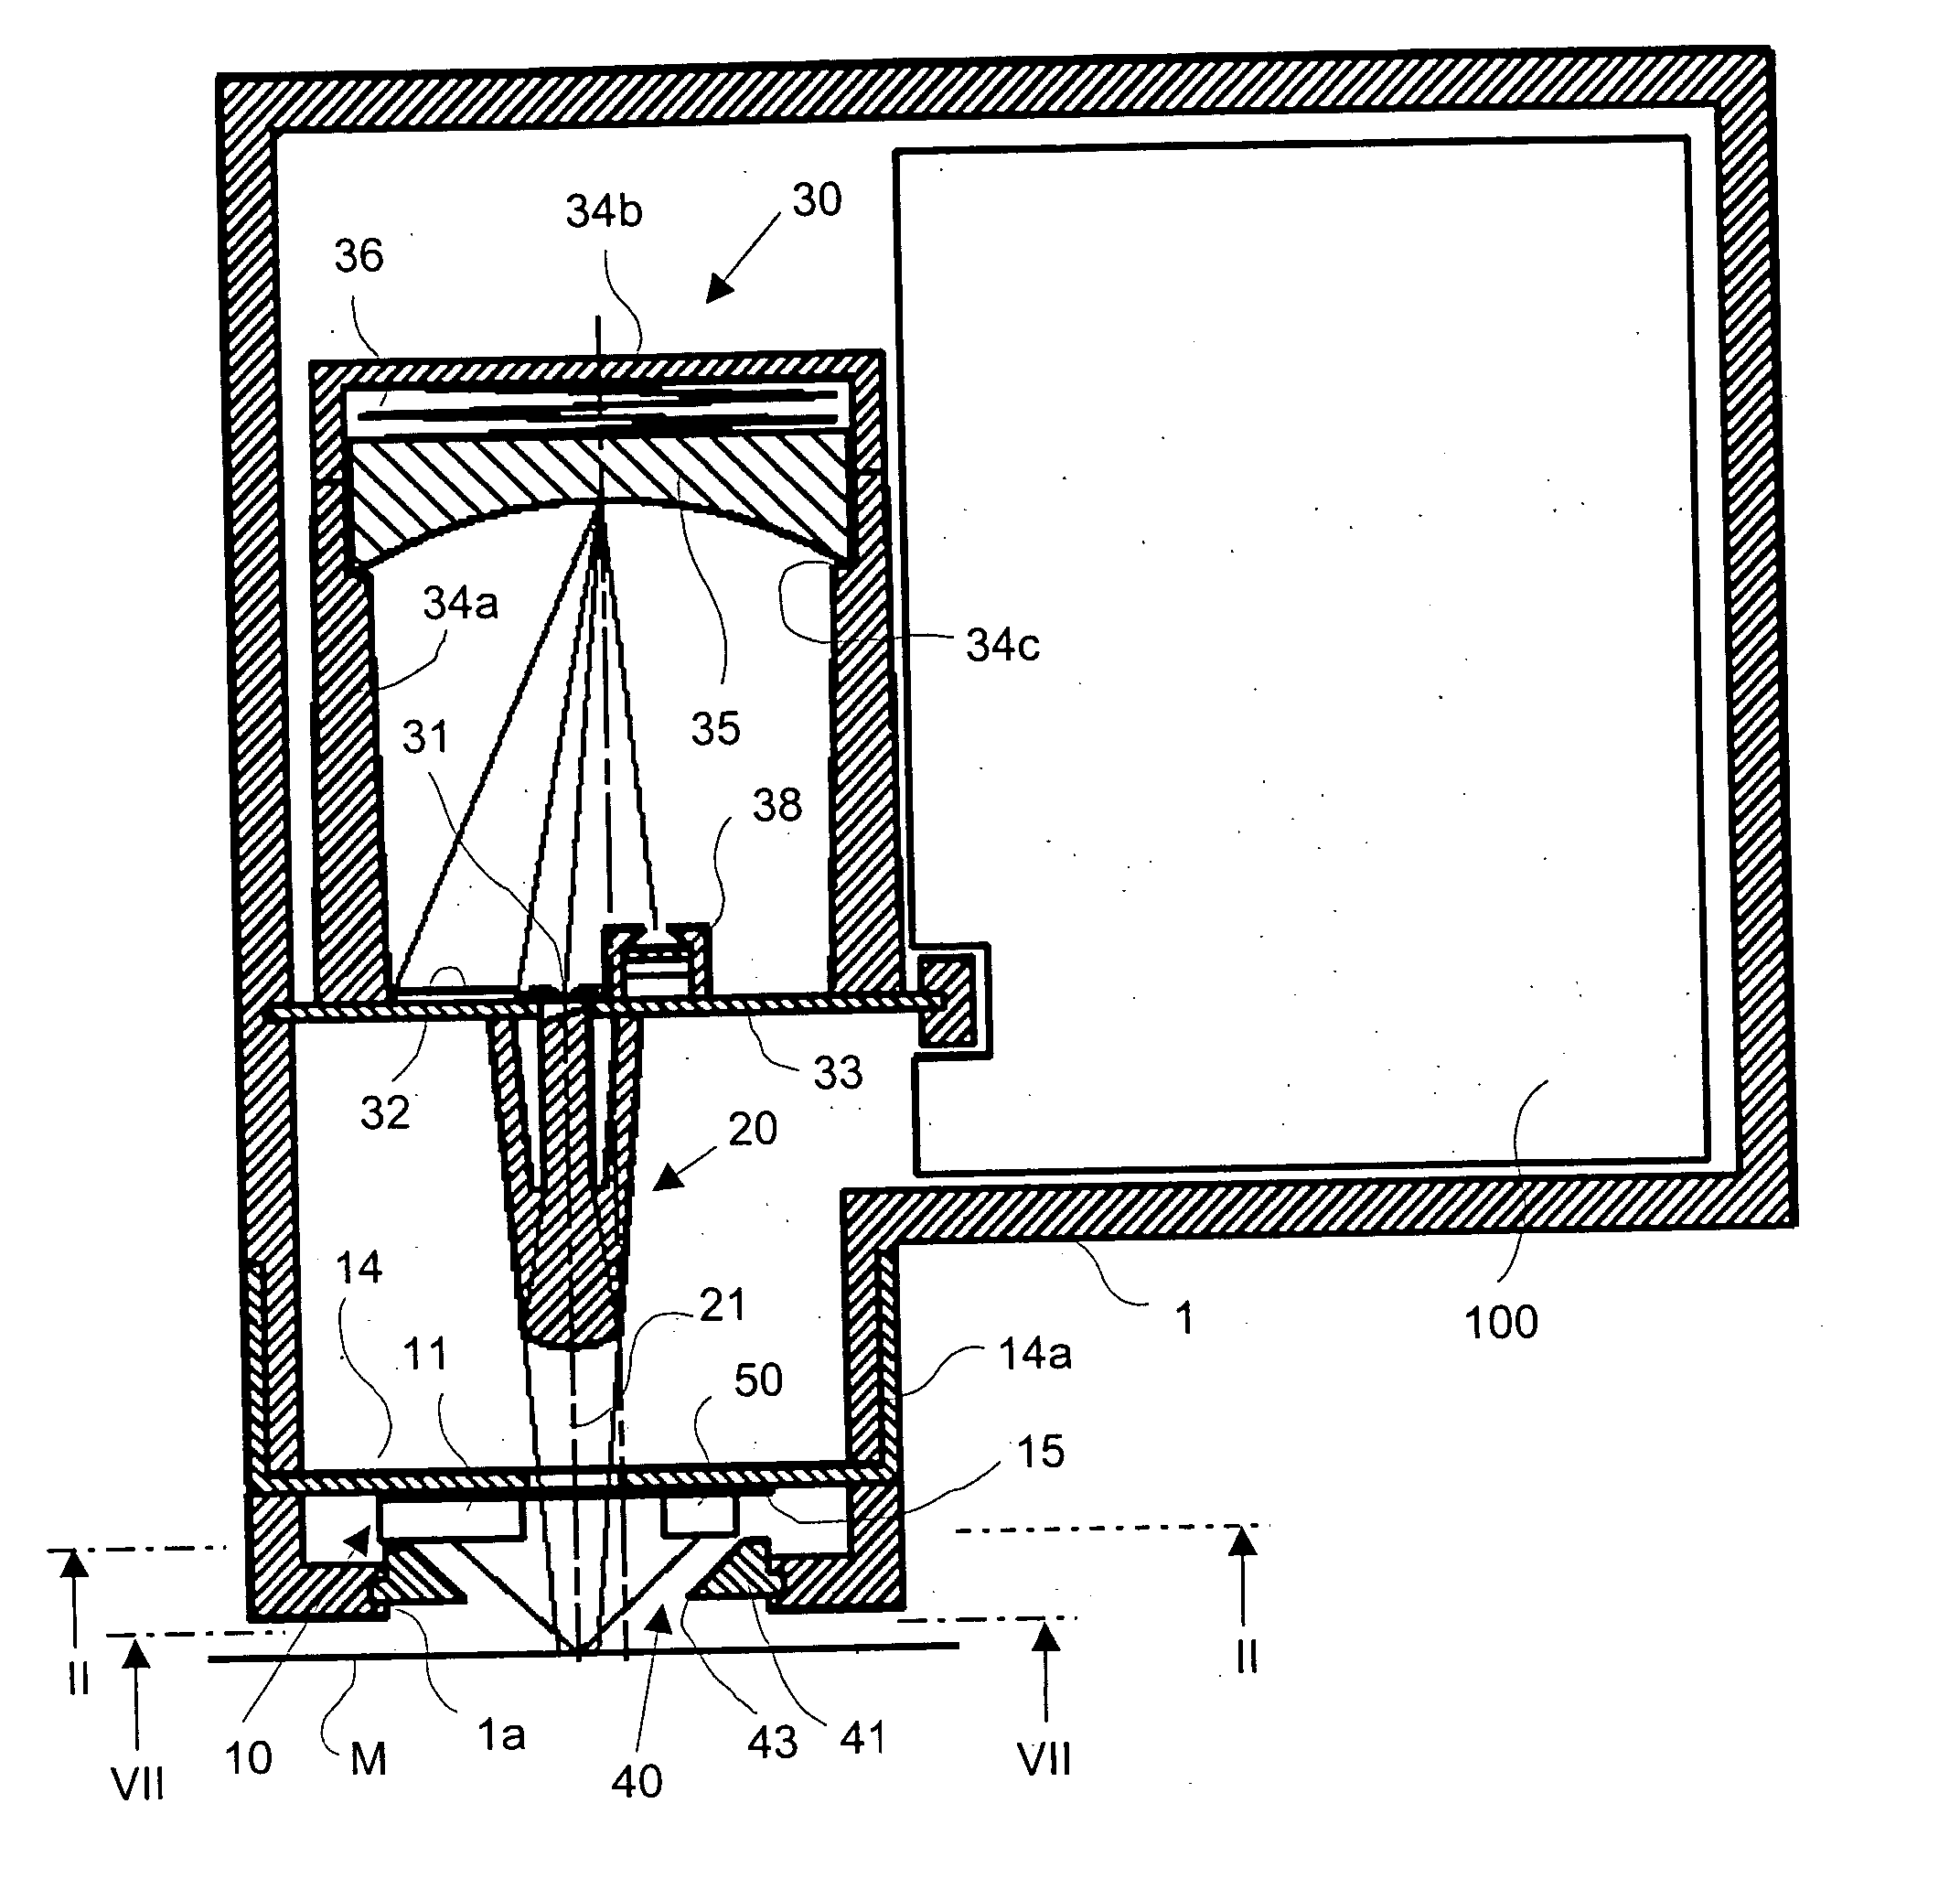 Spectral photometer and associated measuring head